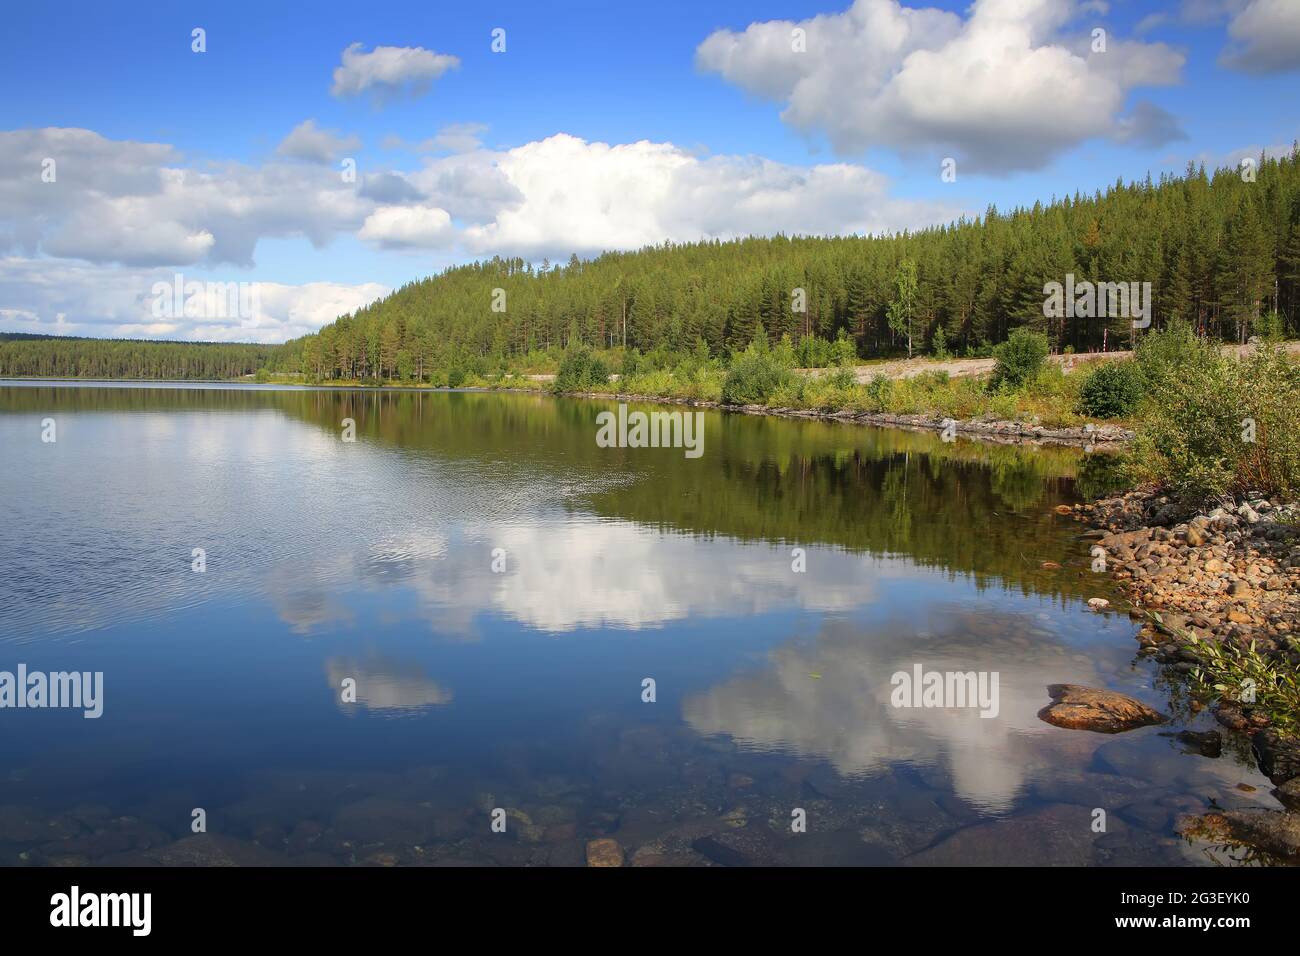 Beautiful landscape with a lake which has reflections of the trees and clouds. The lake lies within the Arctic circle near Polcirkeln, Northern Sweden. Stock Photo